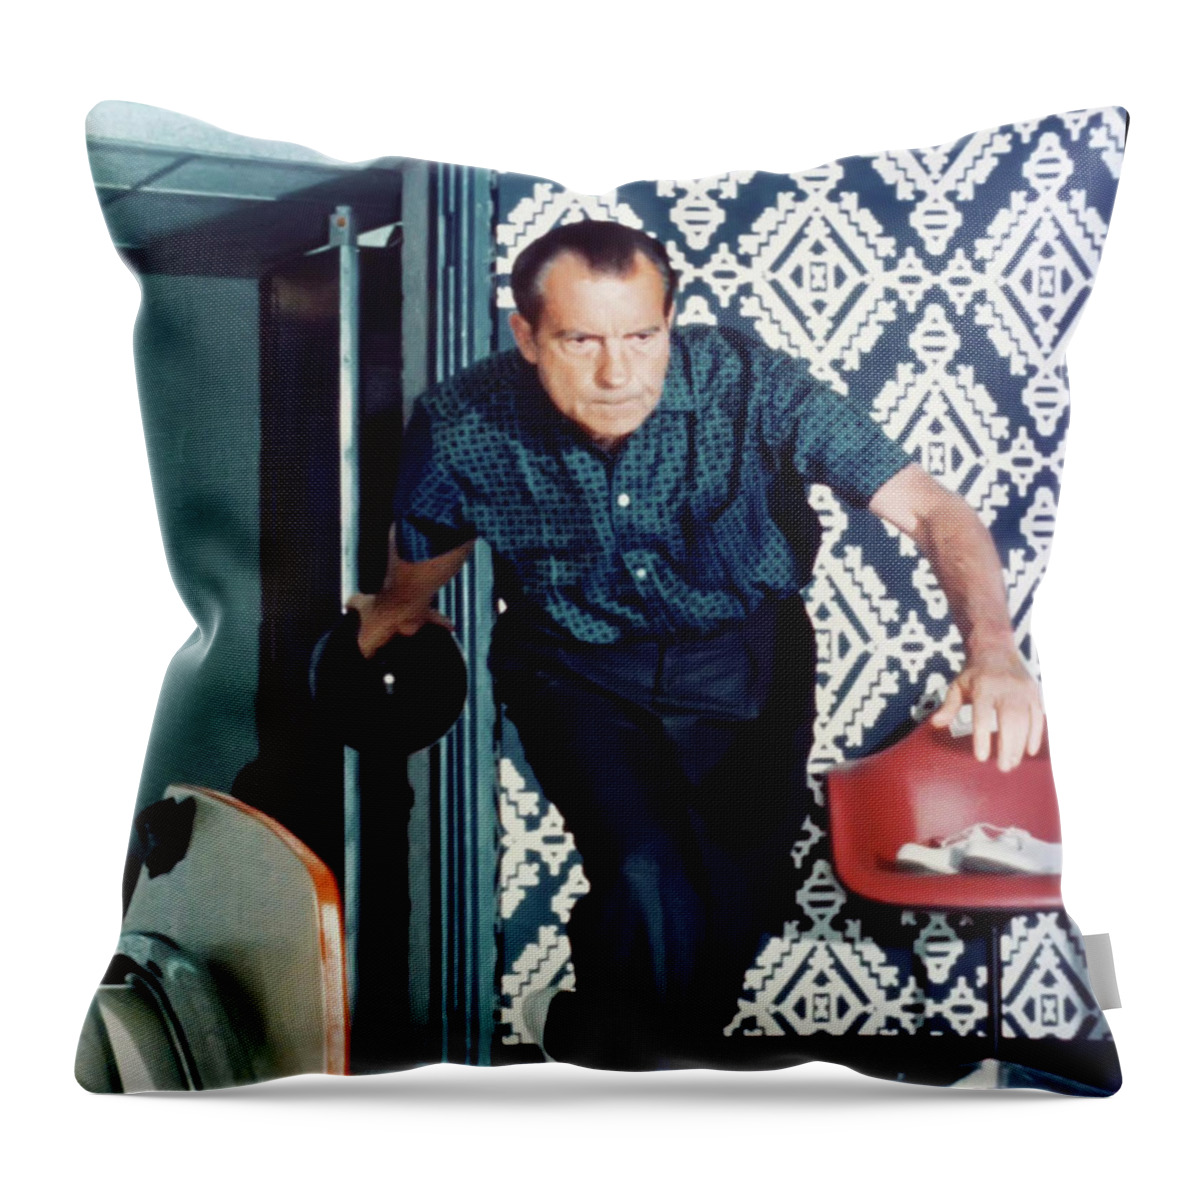 Richard Throw Pillow featuring the photograph President Richard Nixon Bowling by Digital Reproductions